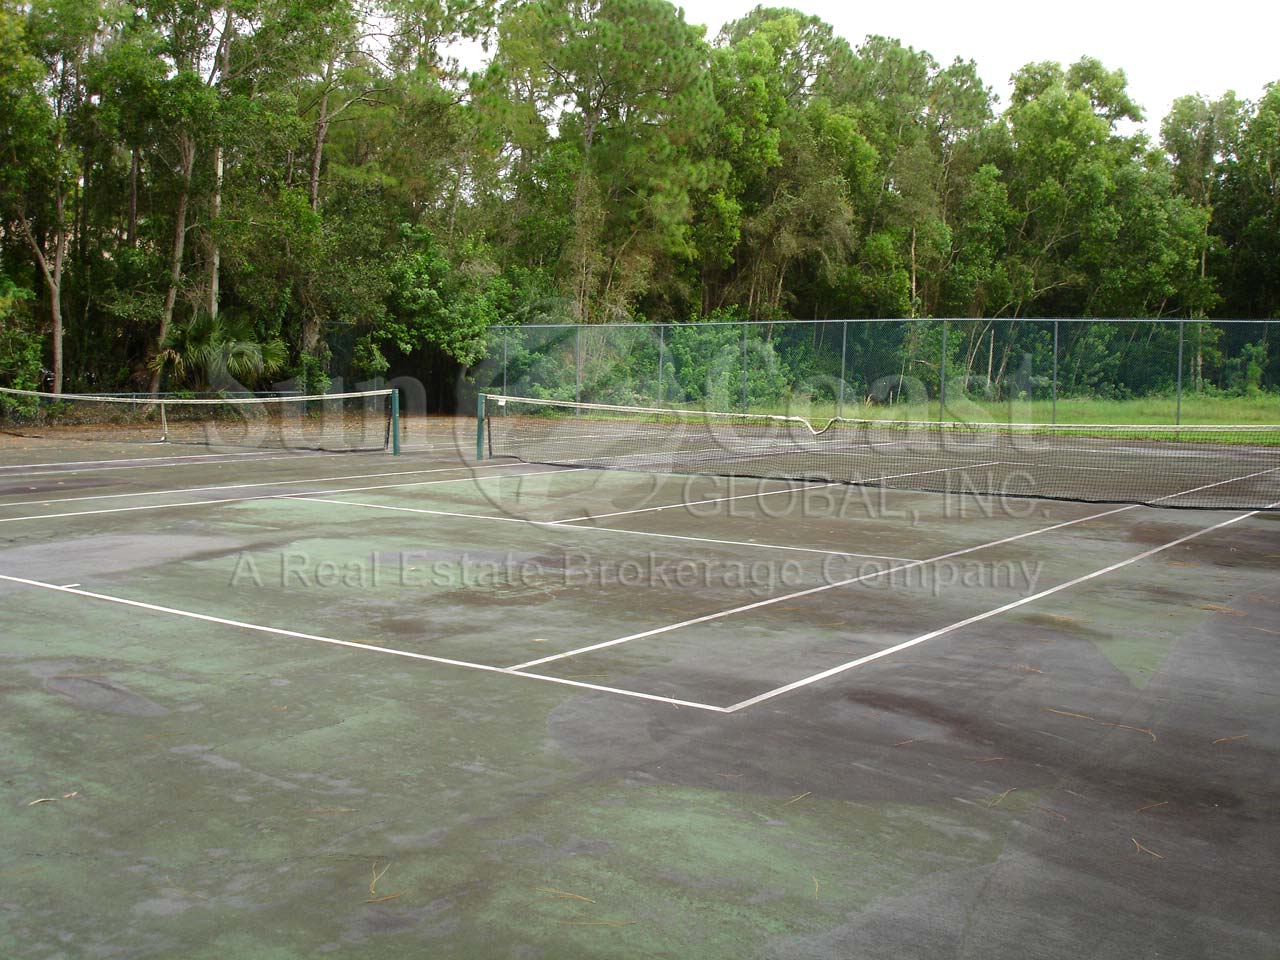 WOODMERE RACQUET CLUB Tennis Courts